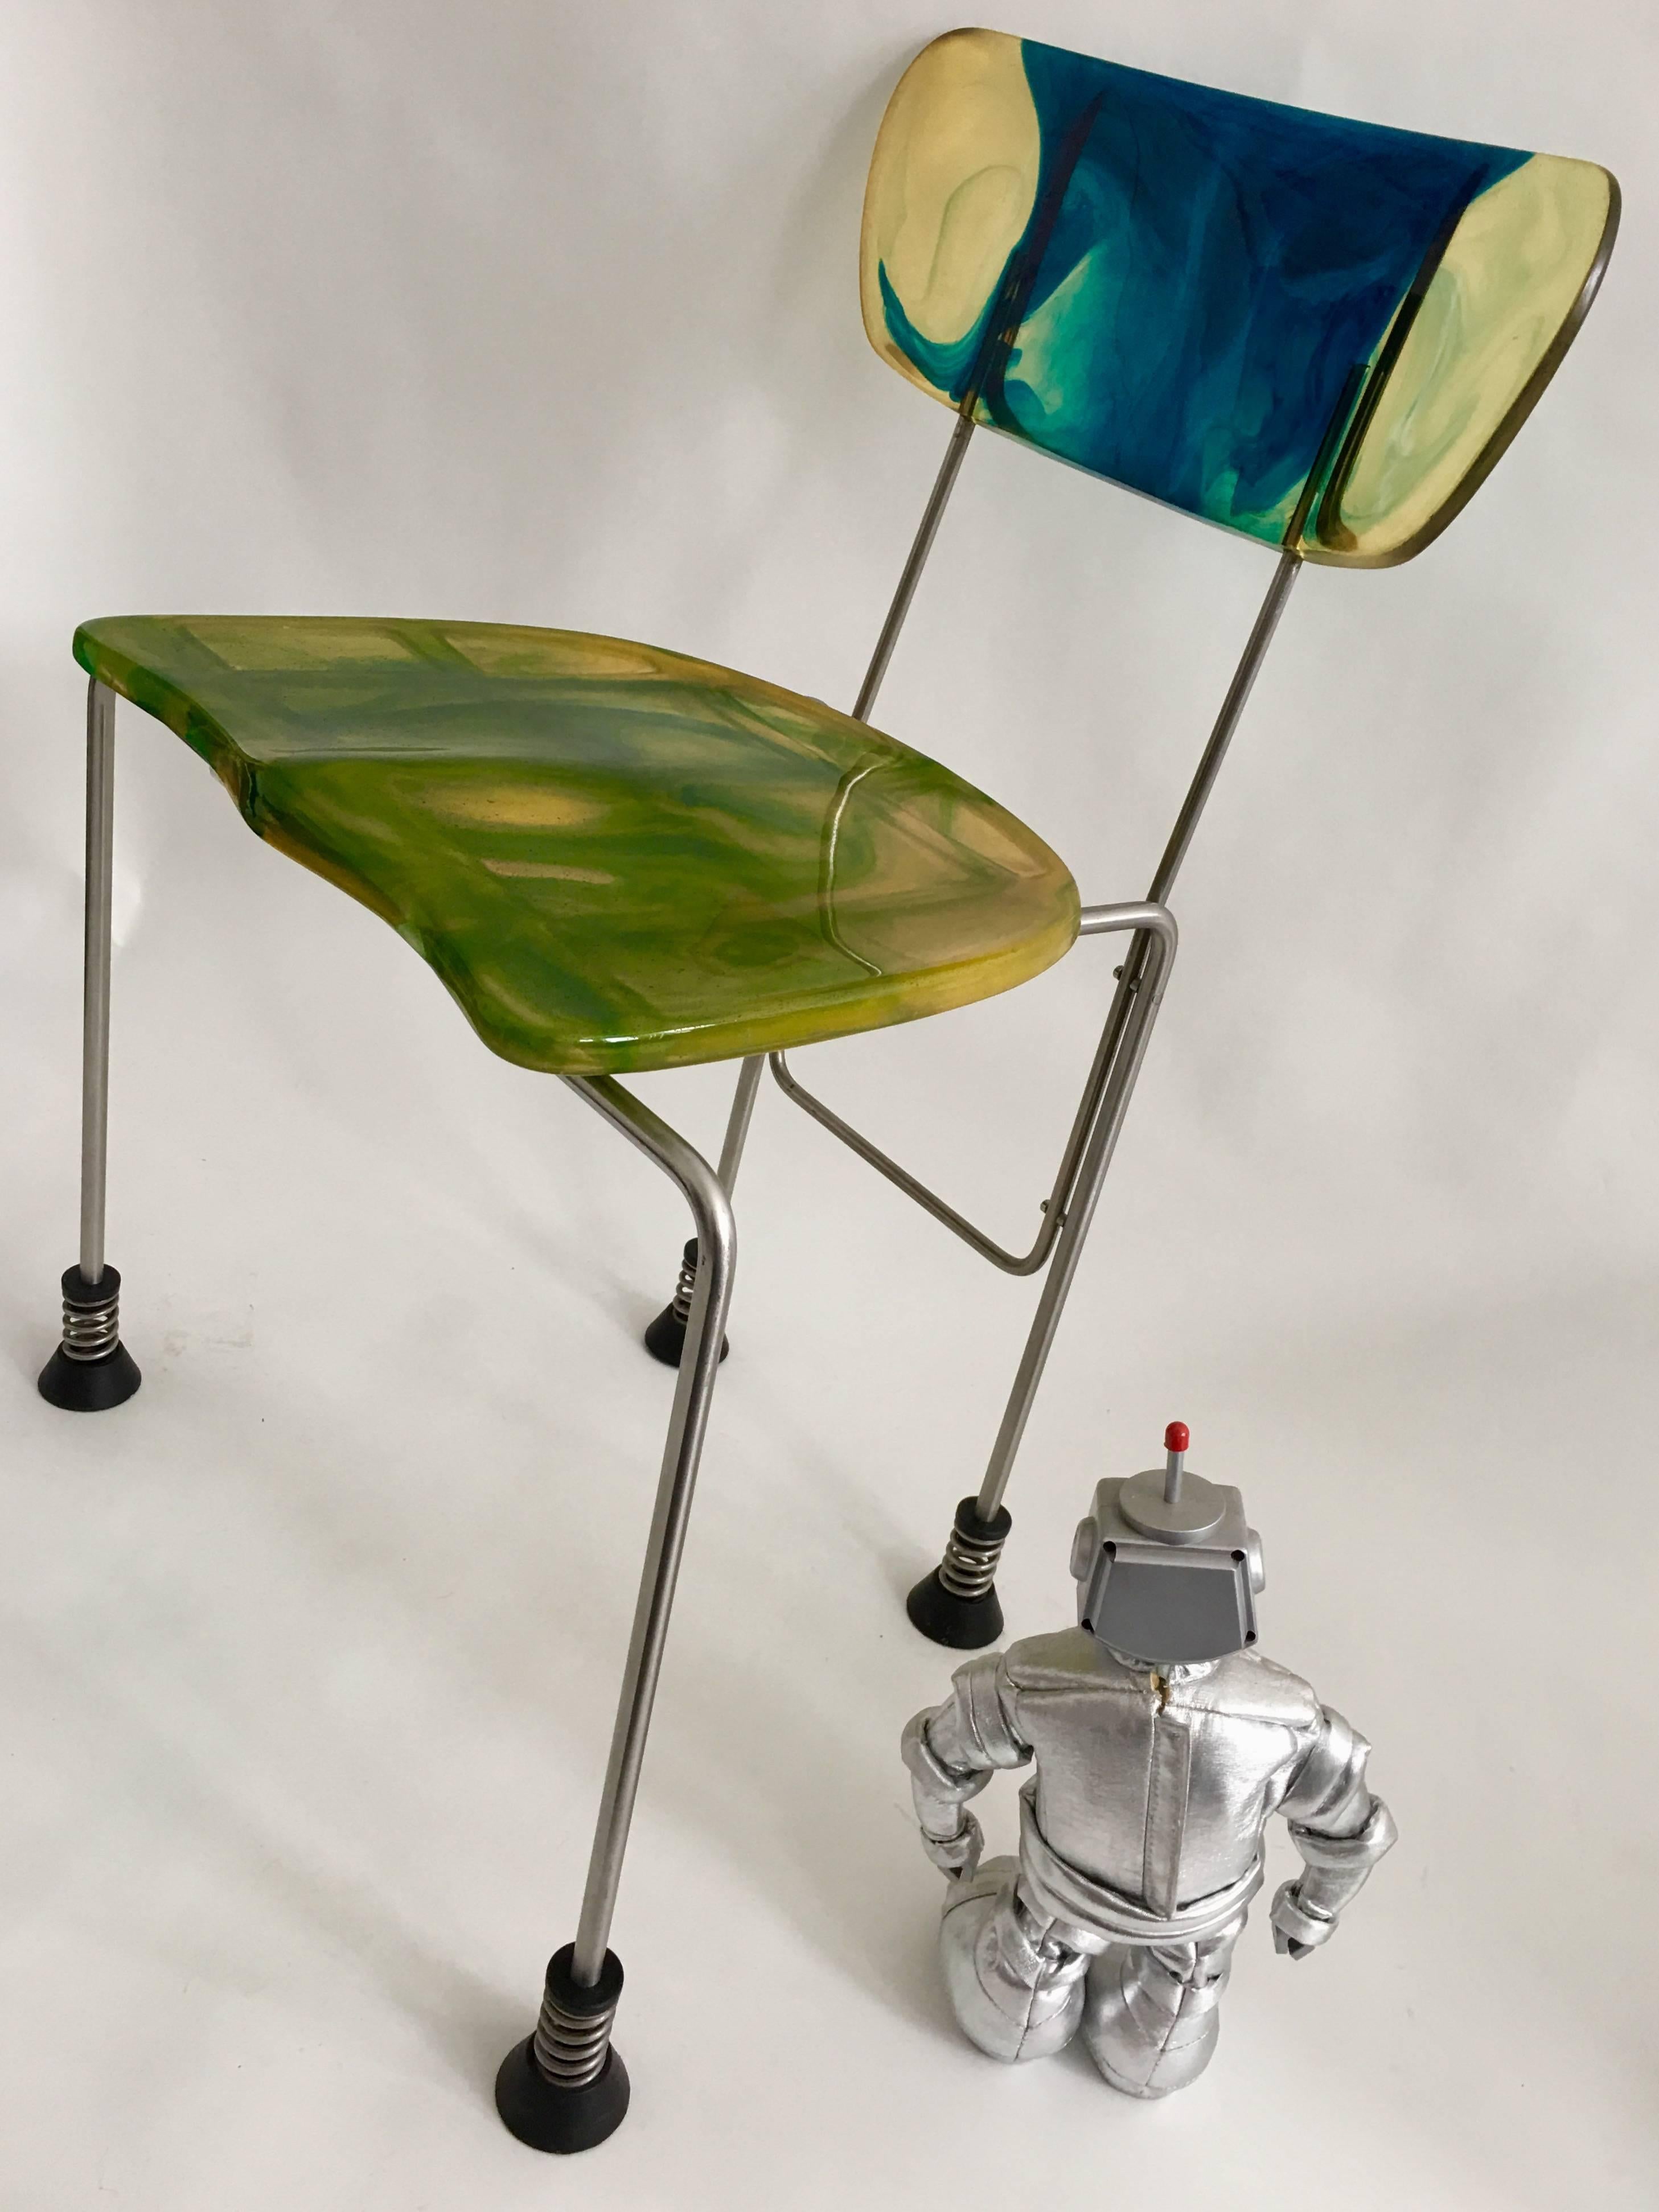 Gaetano Pesce side chair in stainless steel, resin seat and back steel with rubber feet.